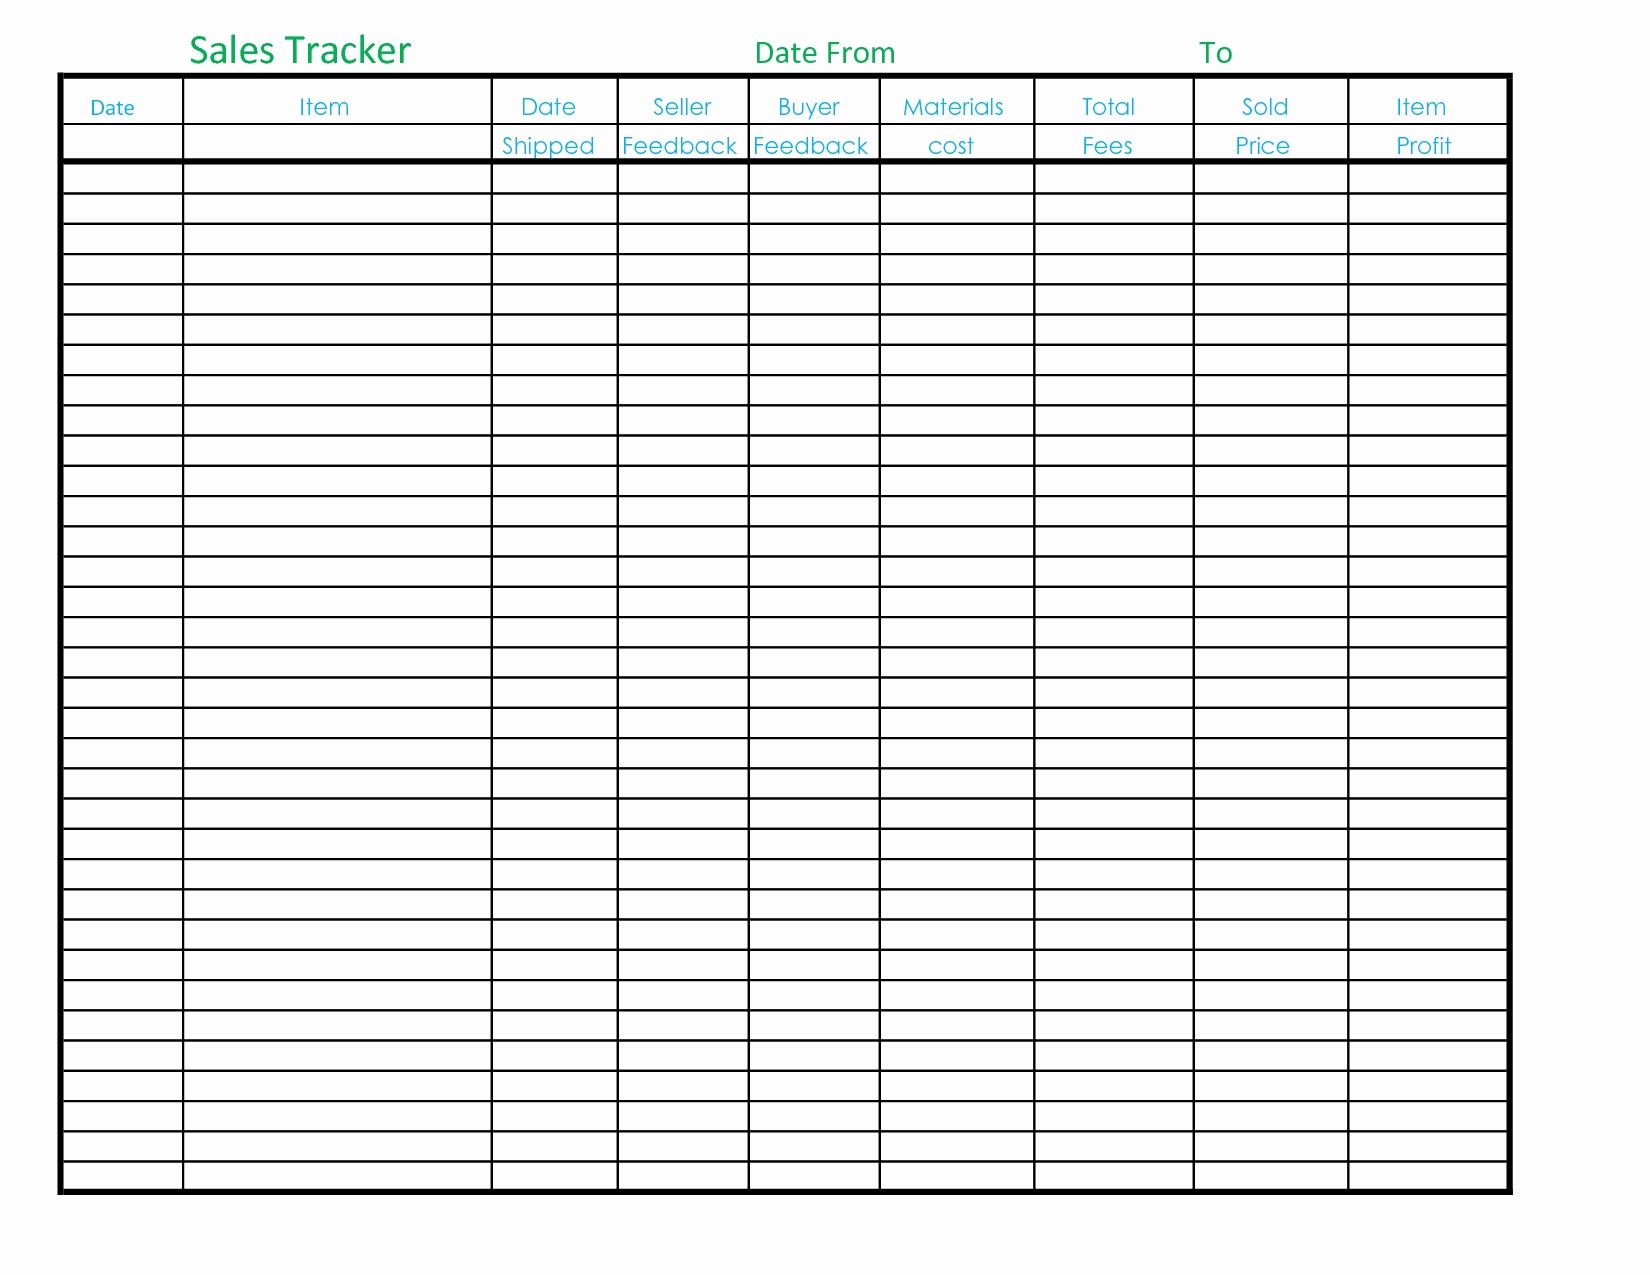 Quote Tracking Spreadsheet Fresh Insurance Sales